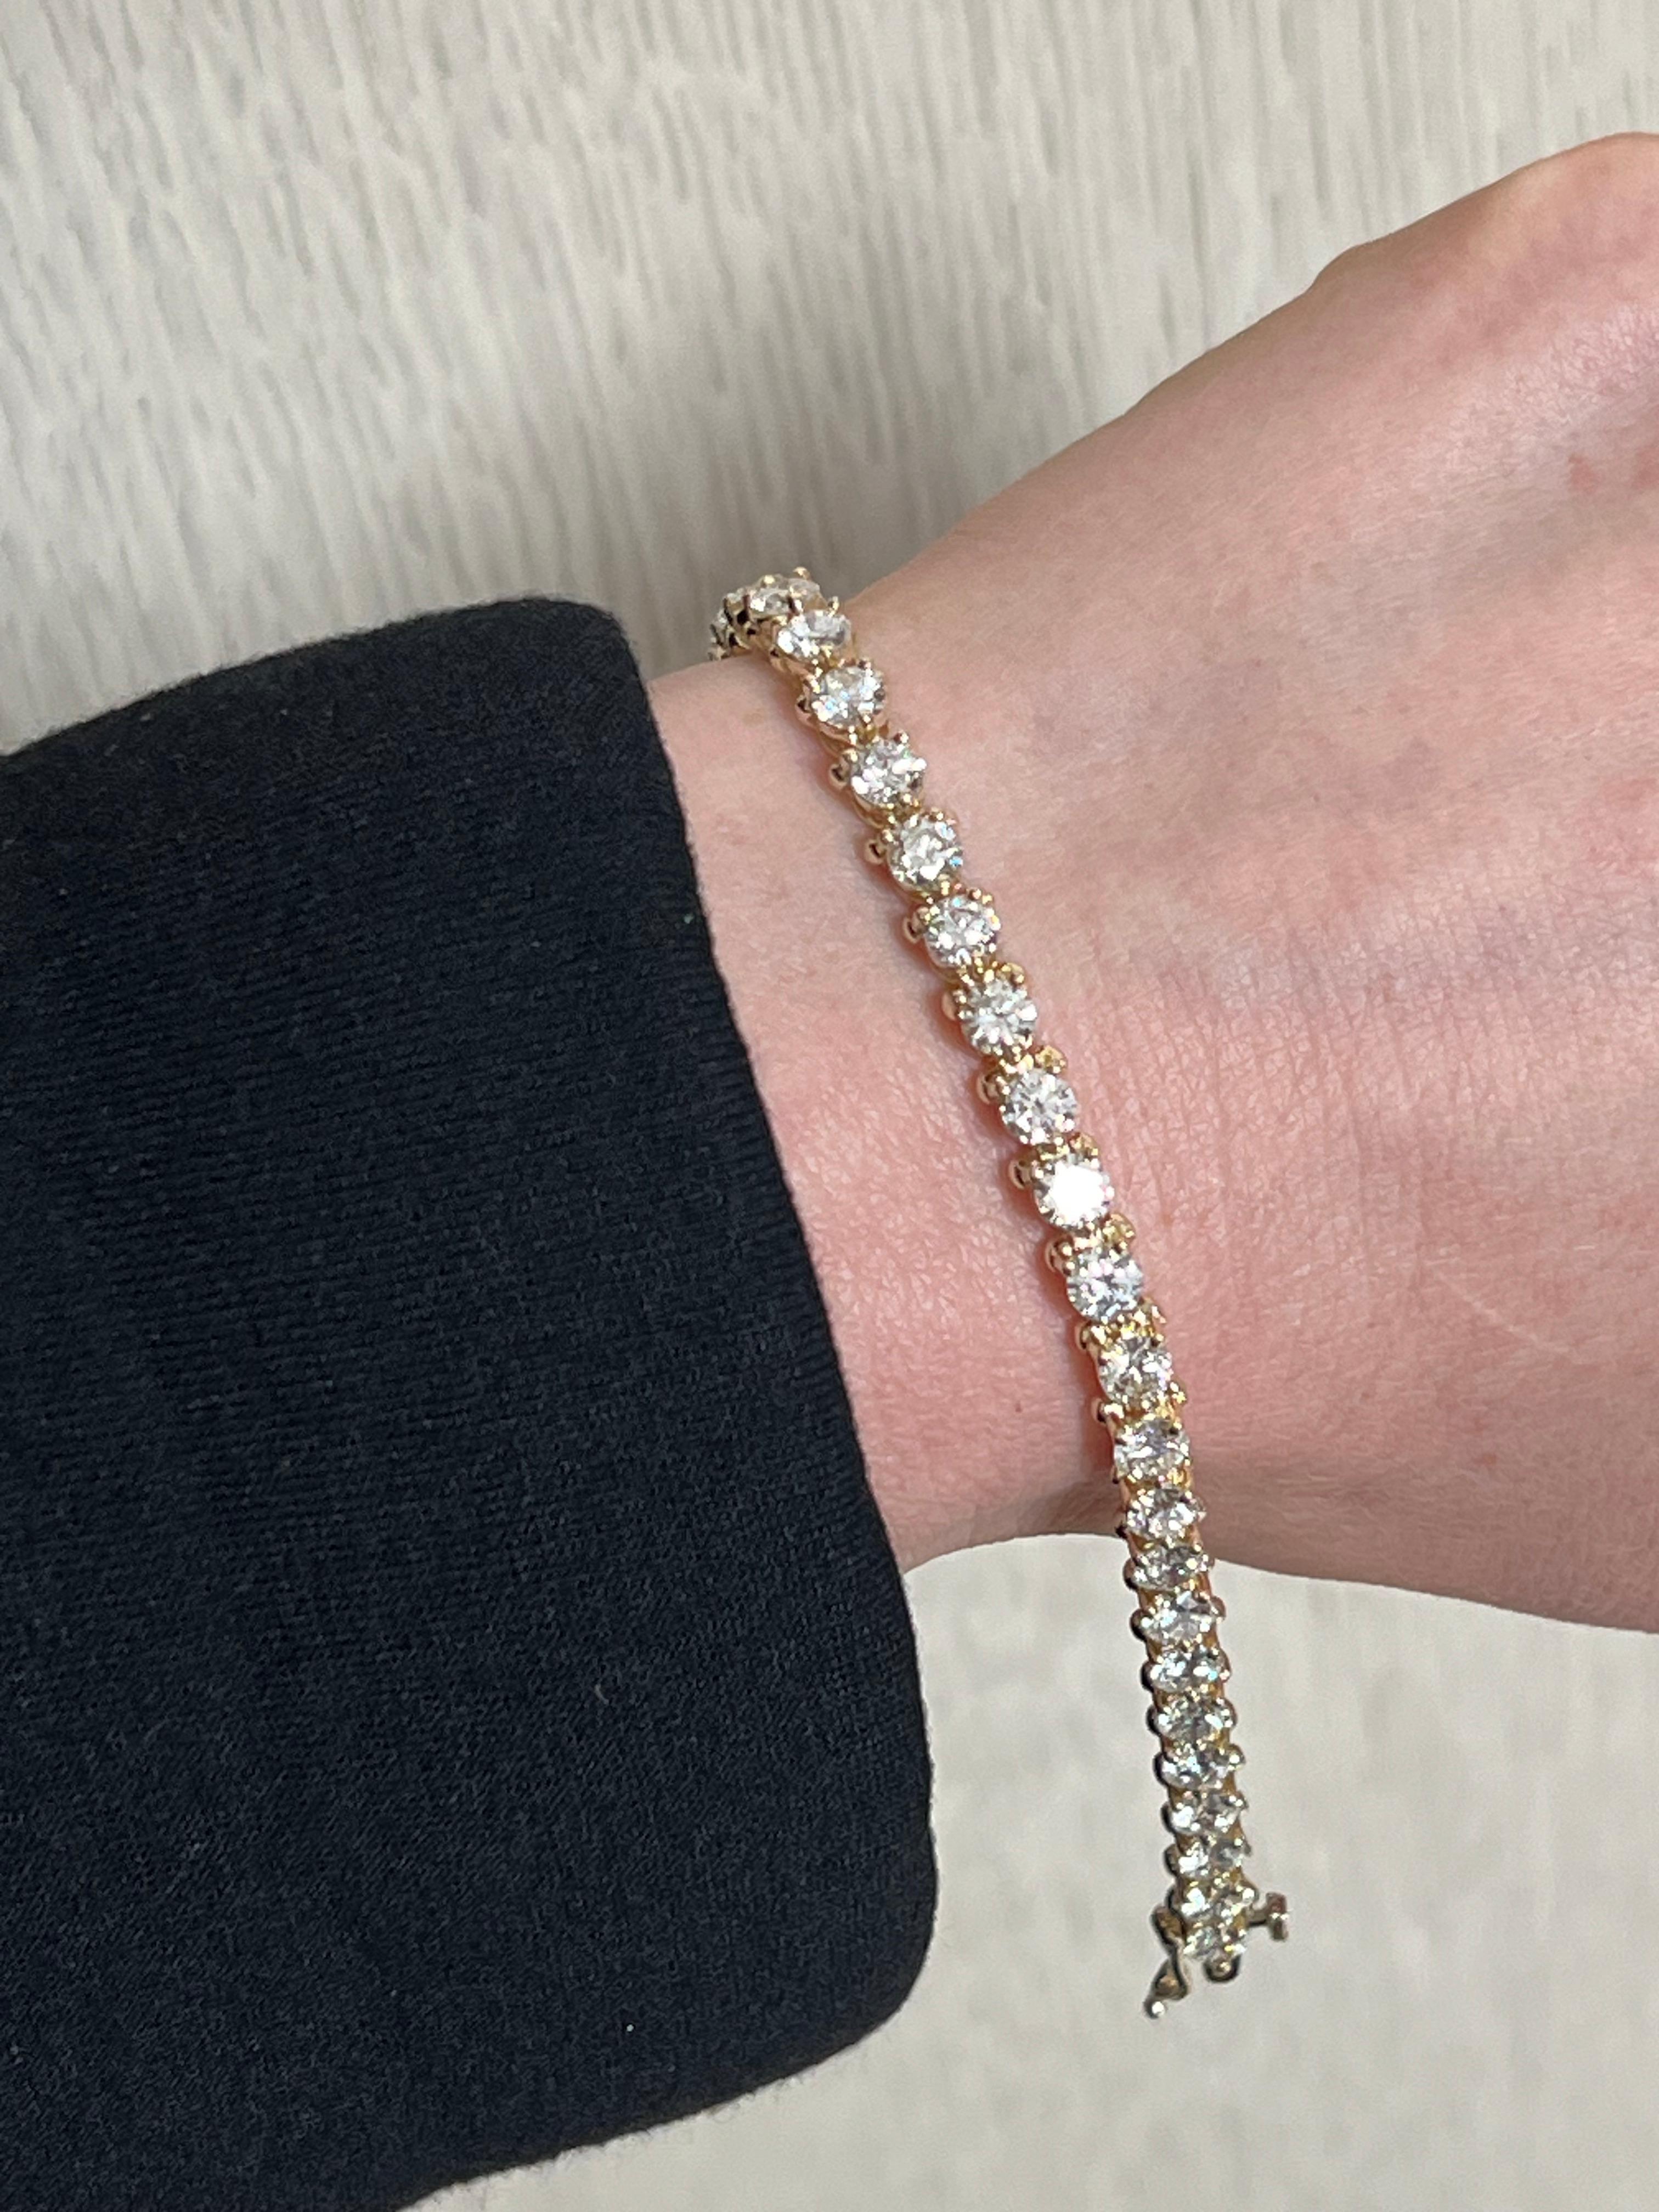 Emilia's Tennis Bracelet In New Condition For Sale In Los Angeles, CA